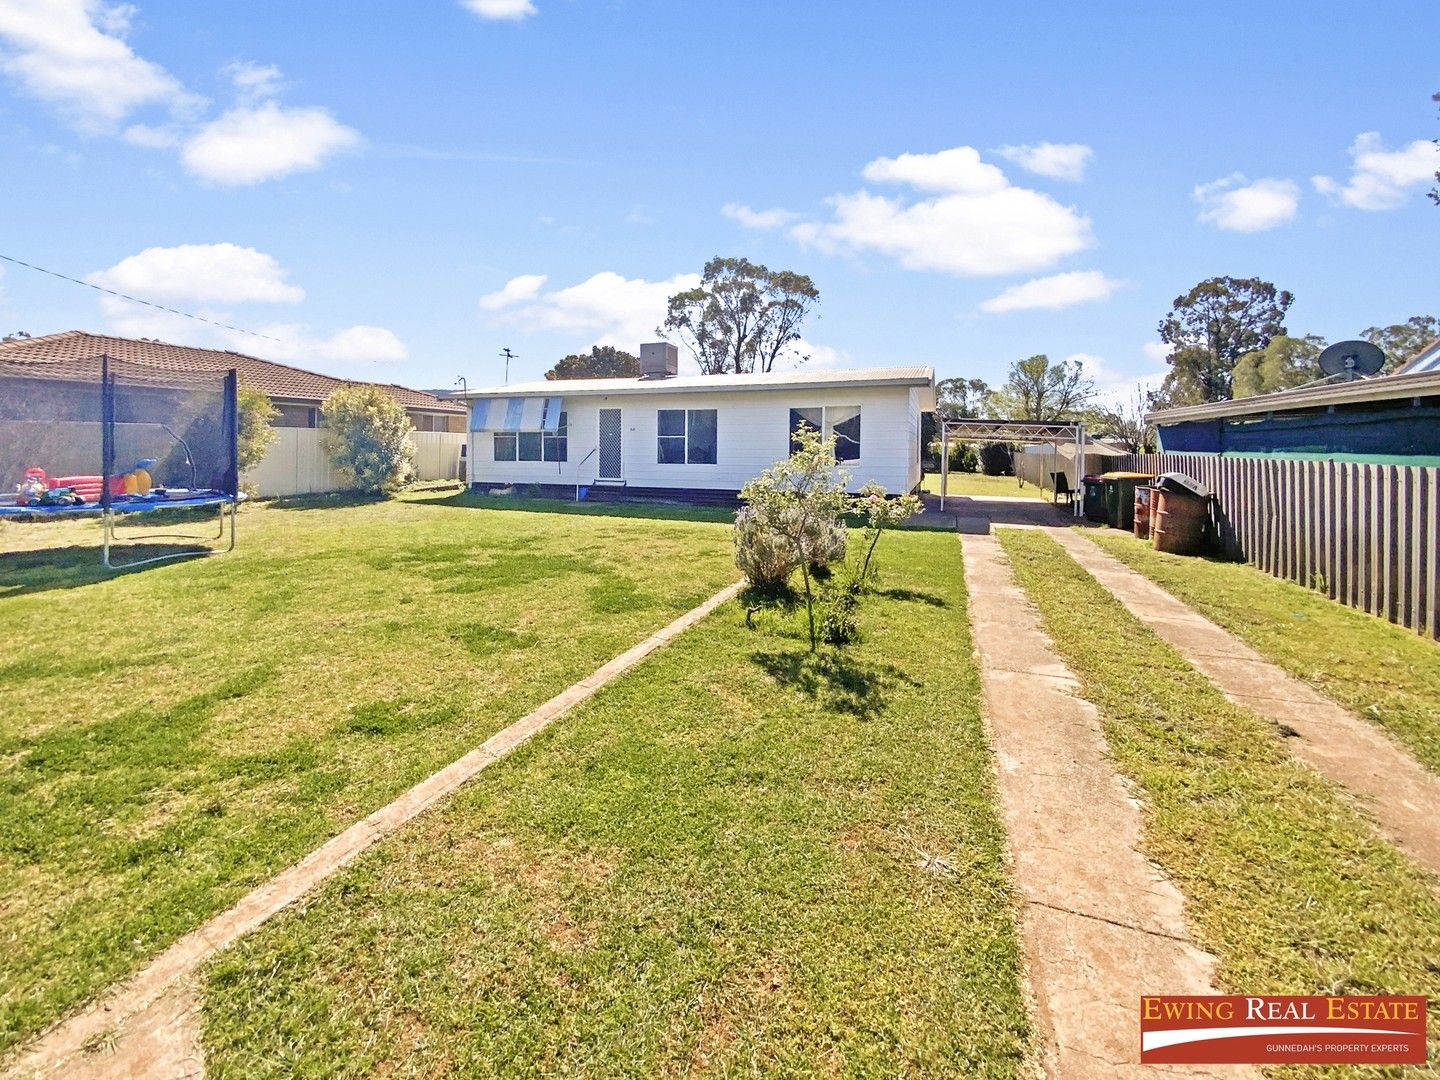 66 PINE STREET, Curlewis NSW 2381, Image 0